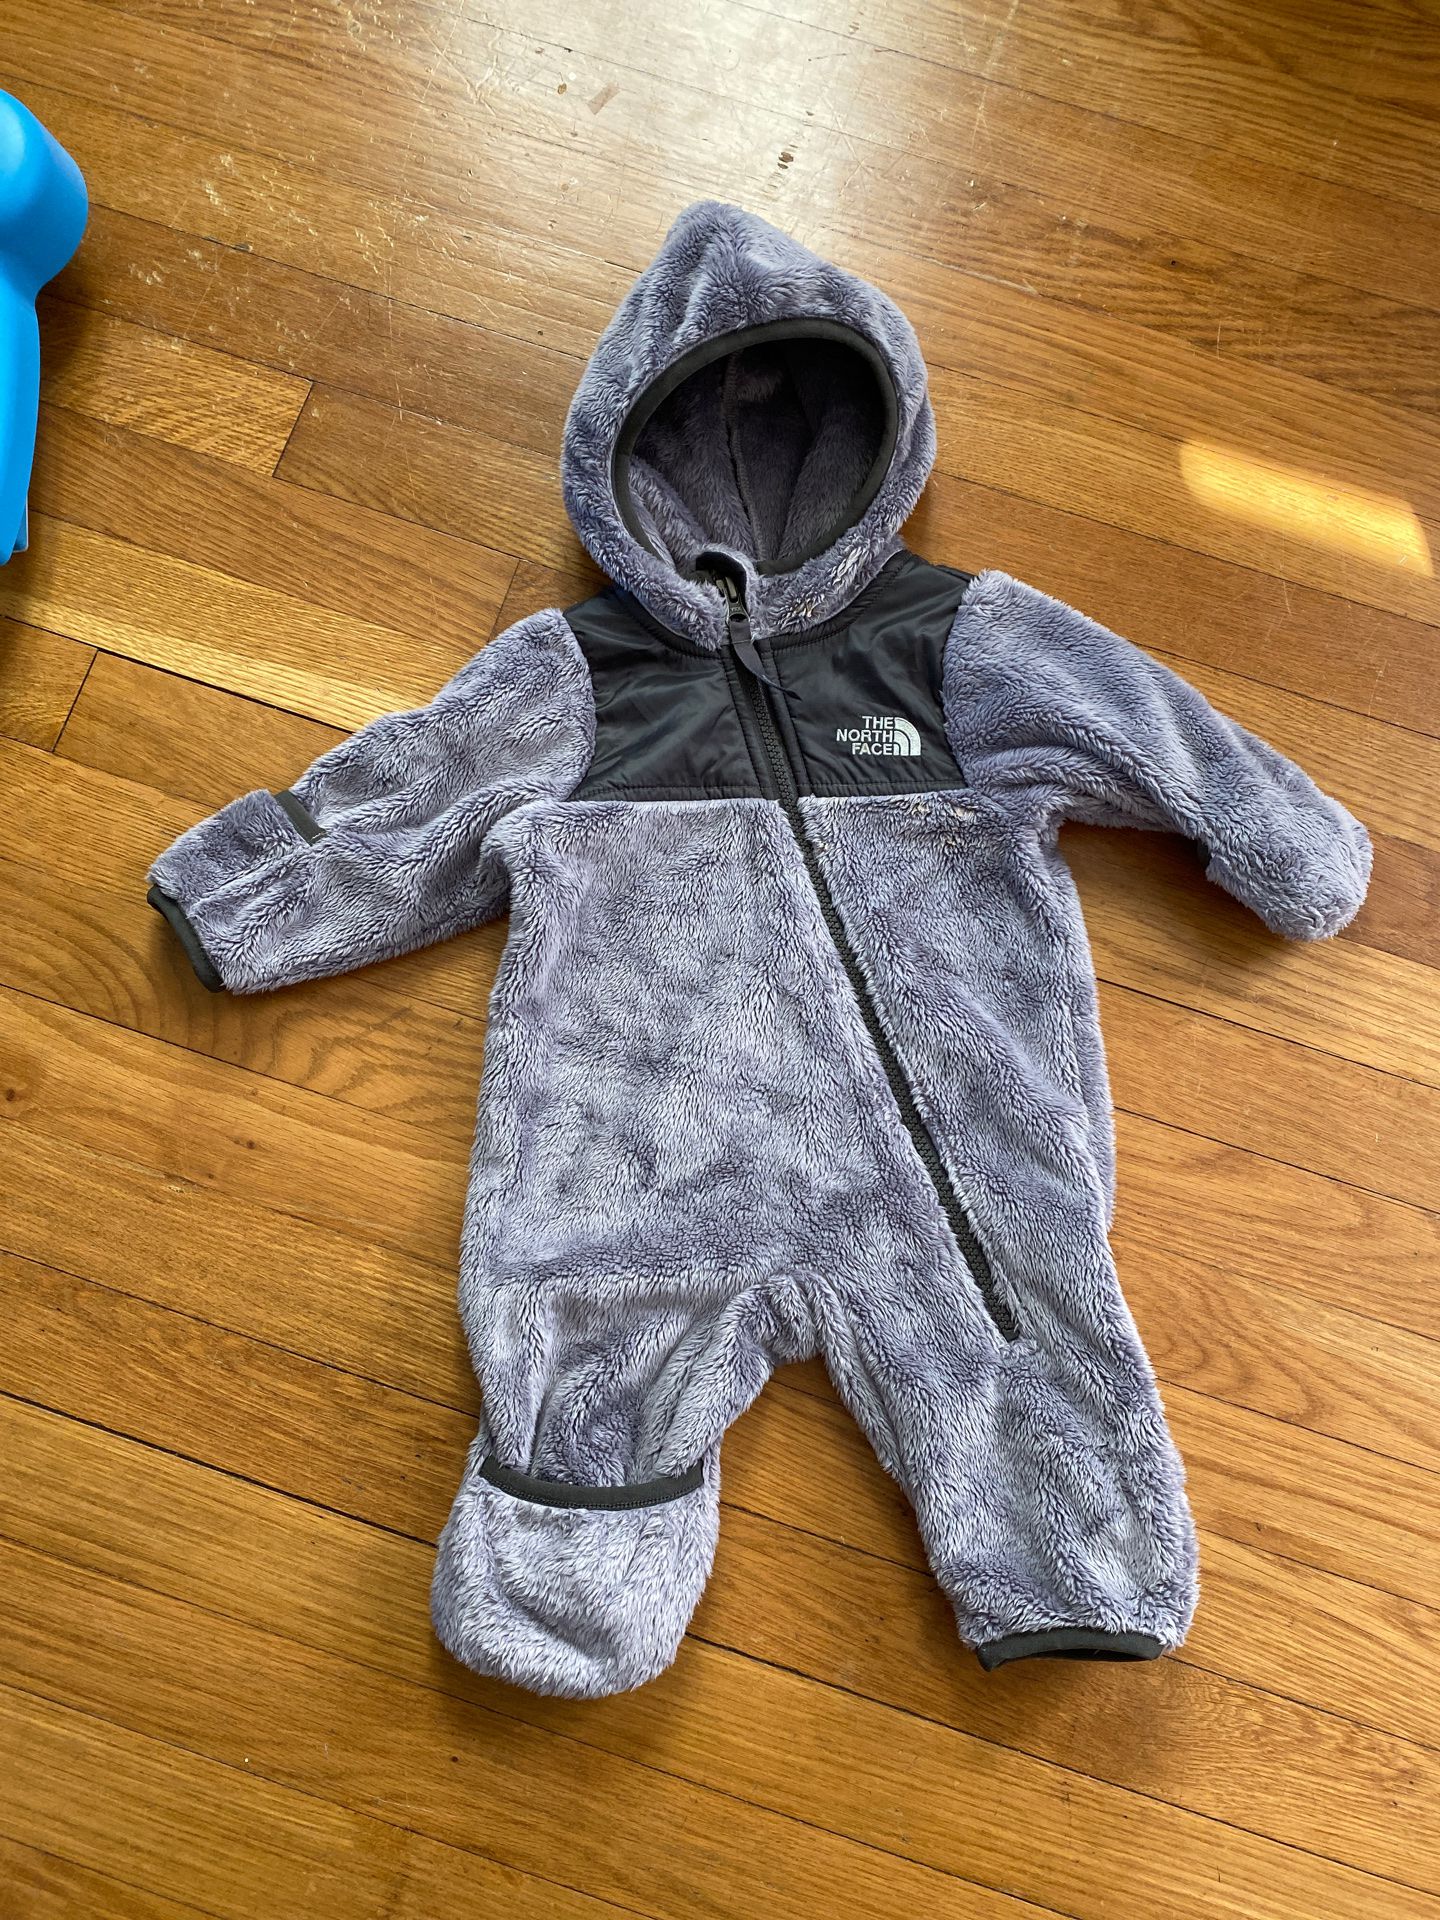 North Face Infant Fleece Sweater Bunting Size 0-3 Months